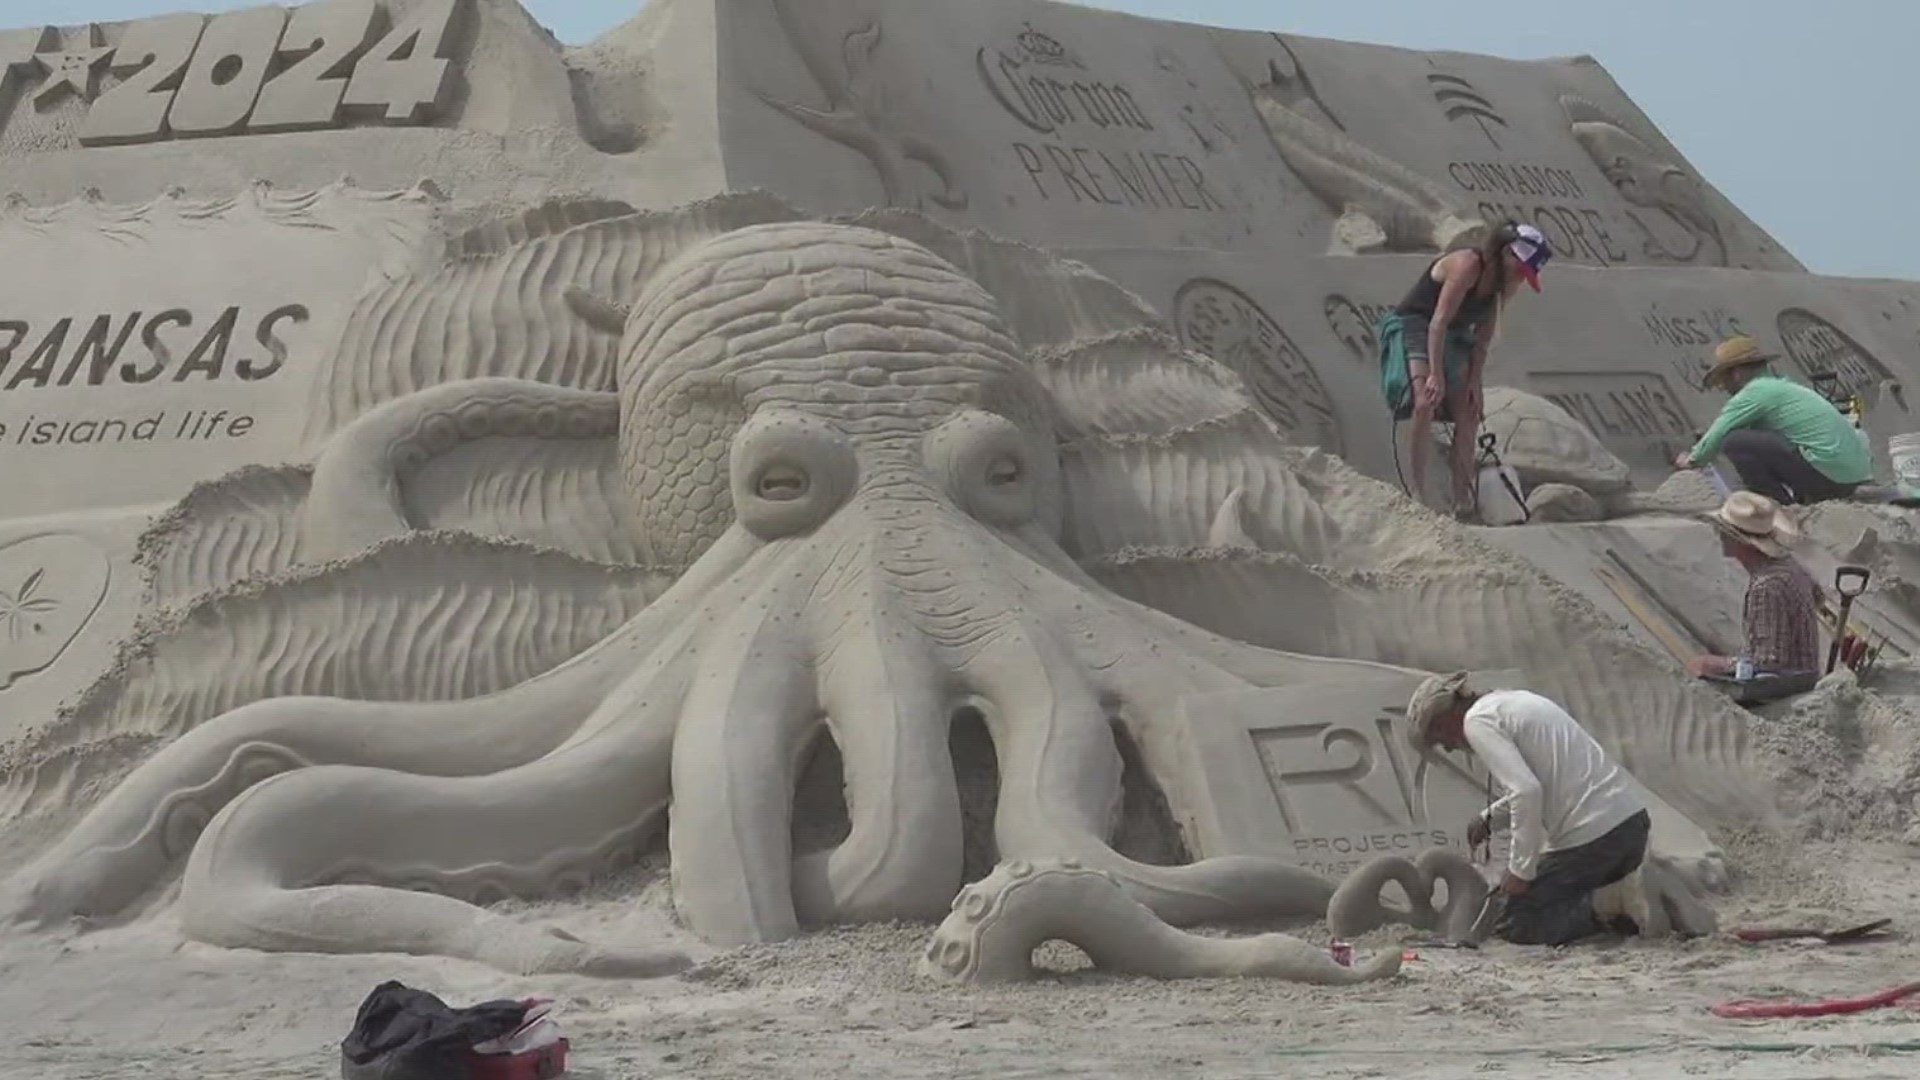 The festival is the largest beach sand sculpture competition in the US!